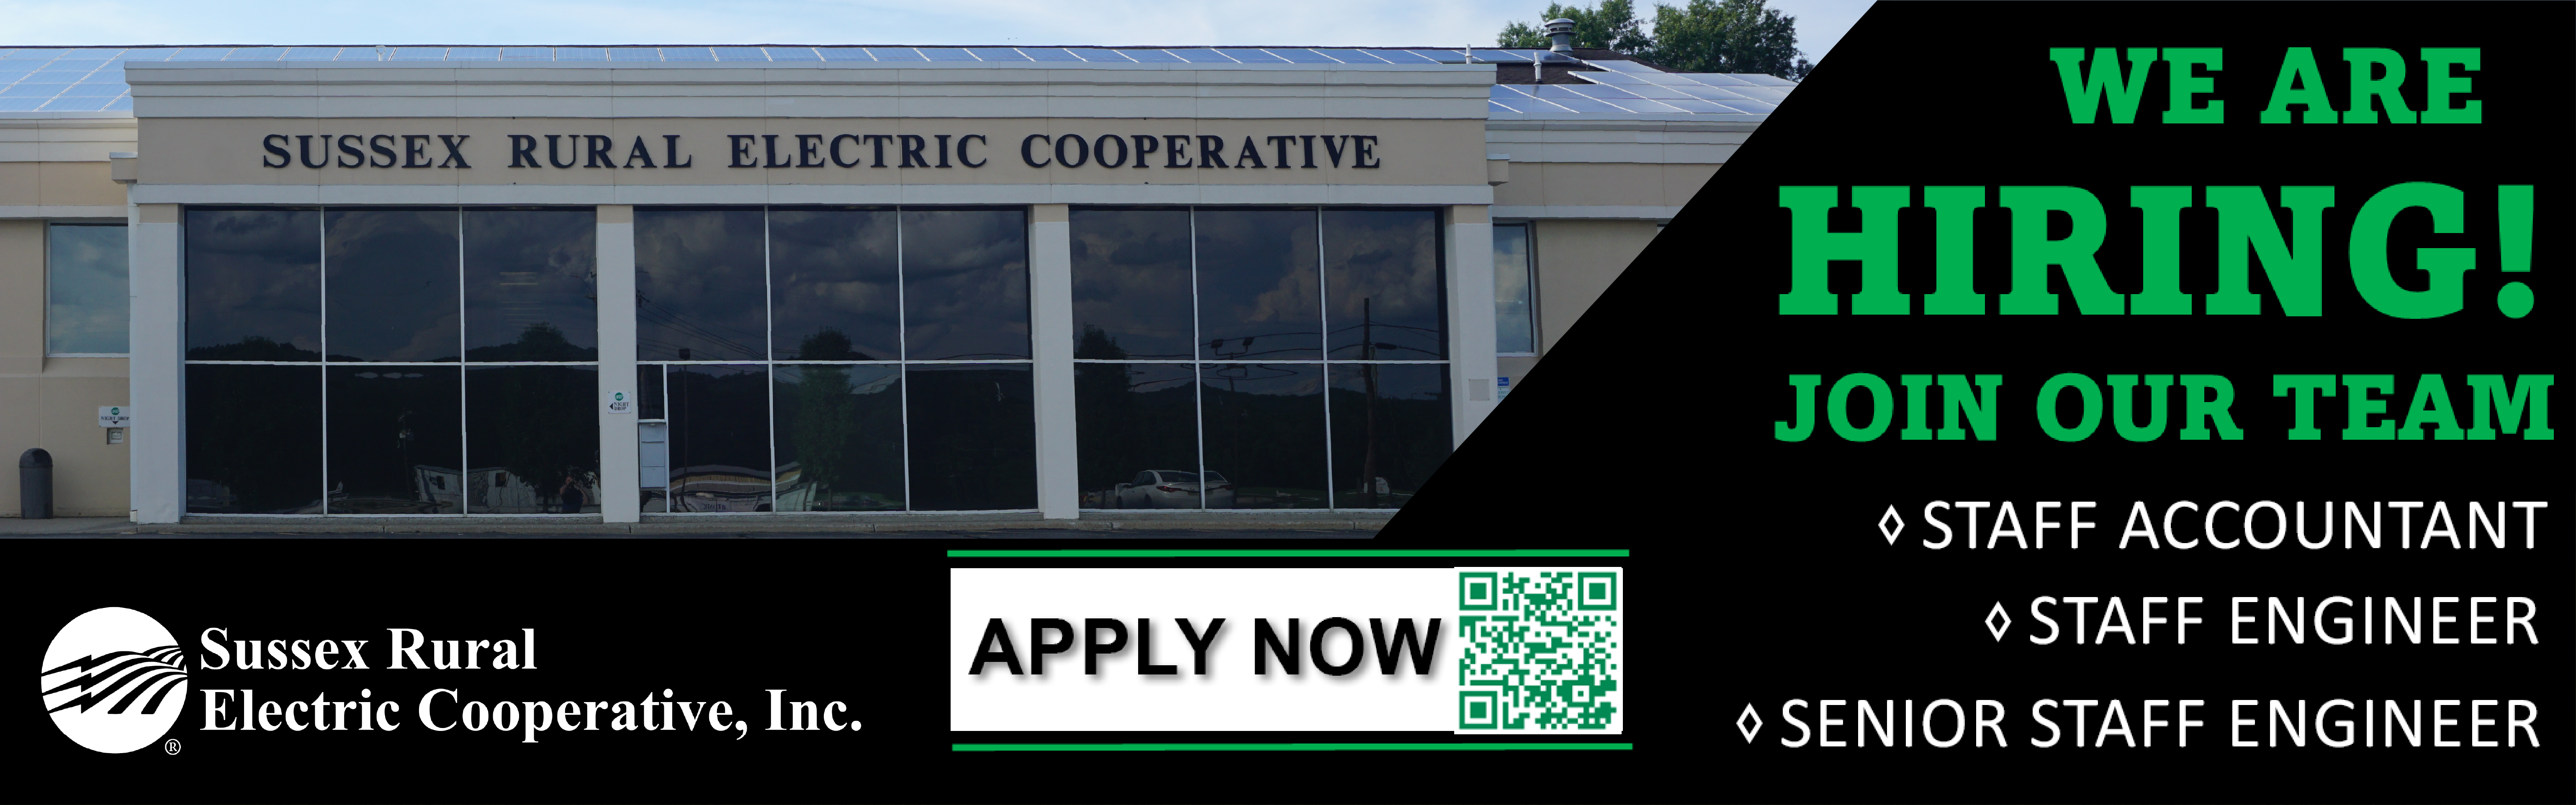 Sussex Rural Electric Cooperative, Inc. WE ARE HIRING! -Staff Acountant -Staff Engineer -Senior Staff Engineer APPLY NOW